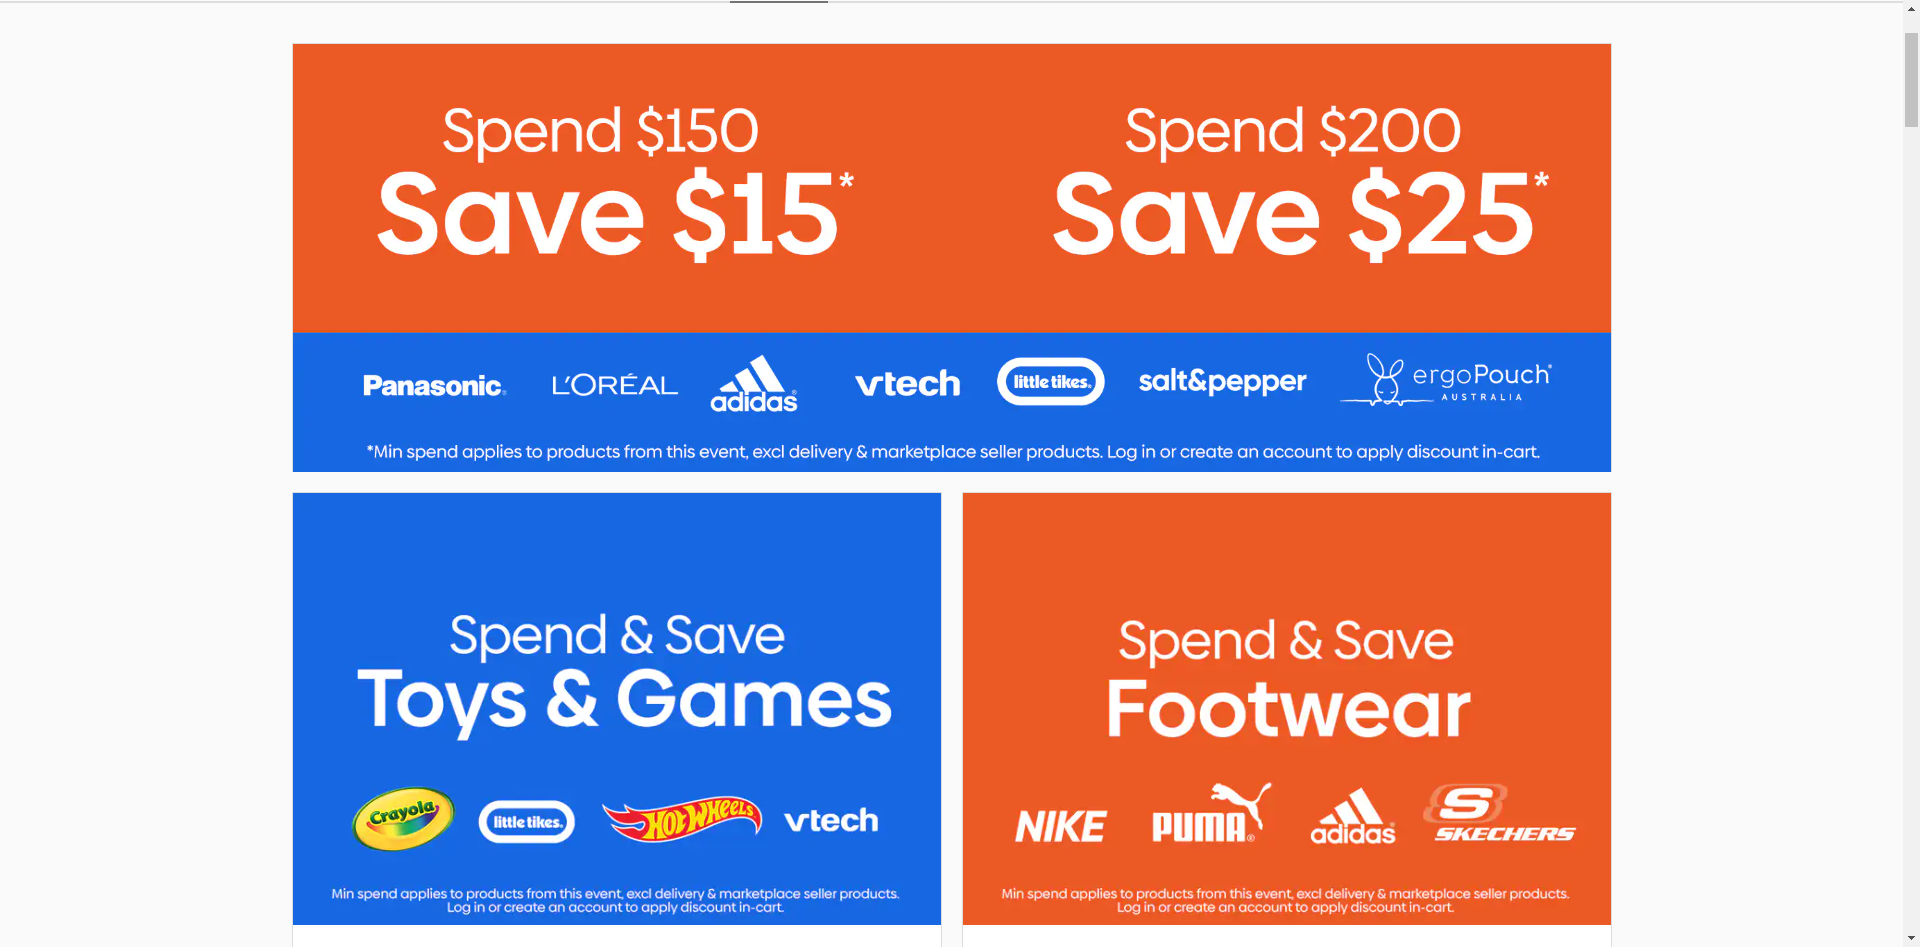 Catch spend $150 save $15, spend $200 save $25. Shipping from $6.95 and free with OnePass.